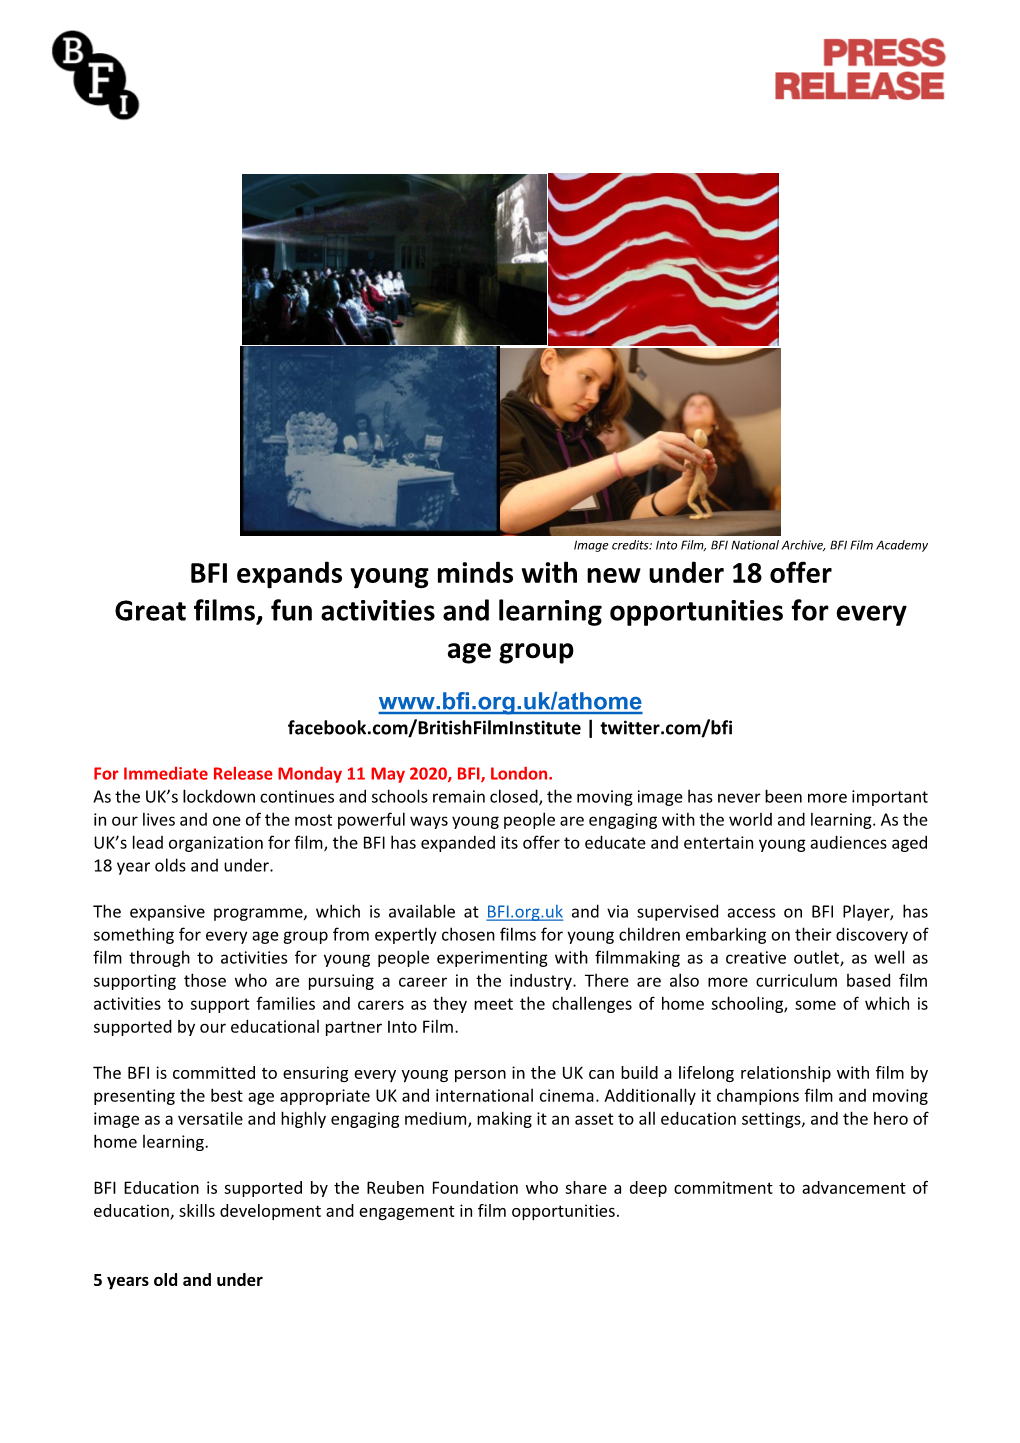 BFI Expands Young Minds with New Under 18 Offer Great Films, Fun Activities and Learning Opportunities for Every Age Group